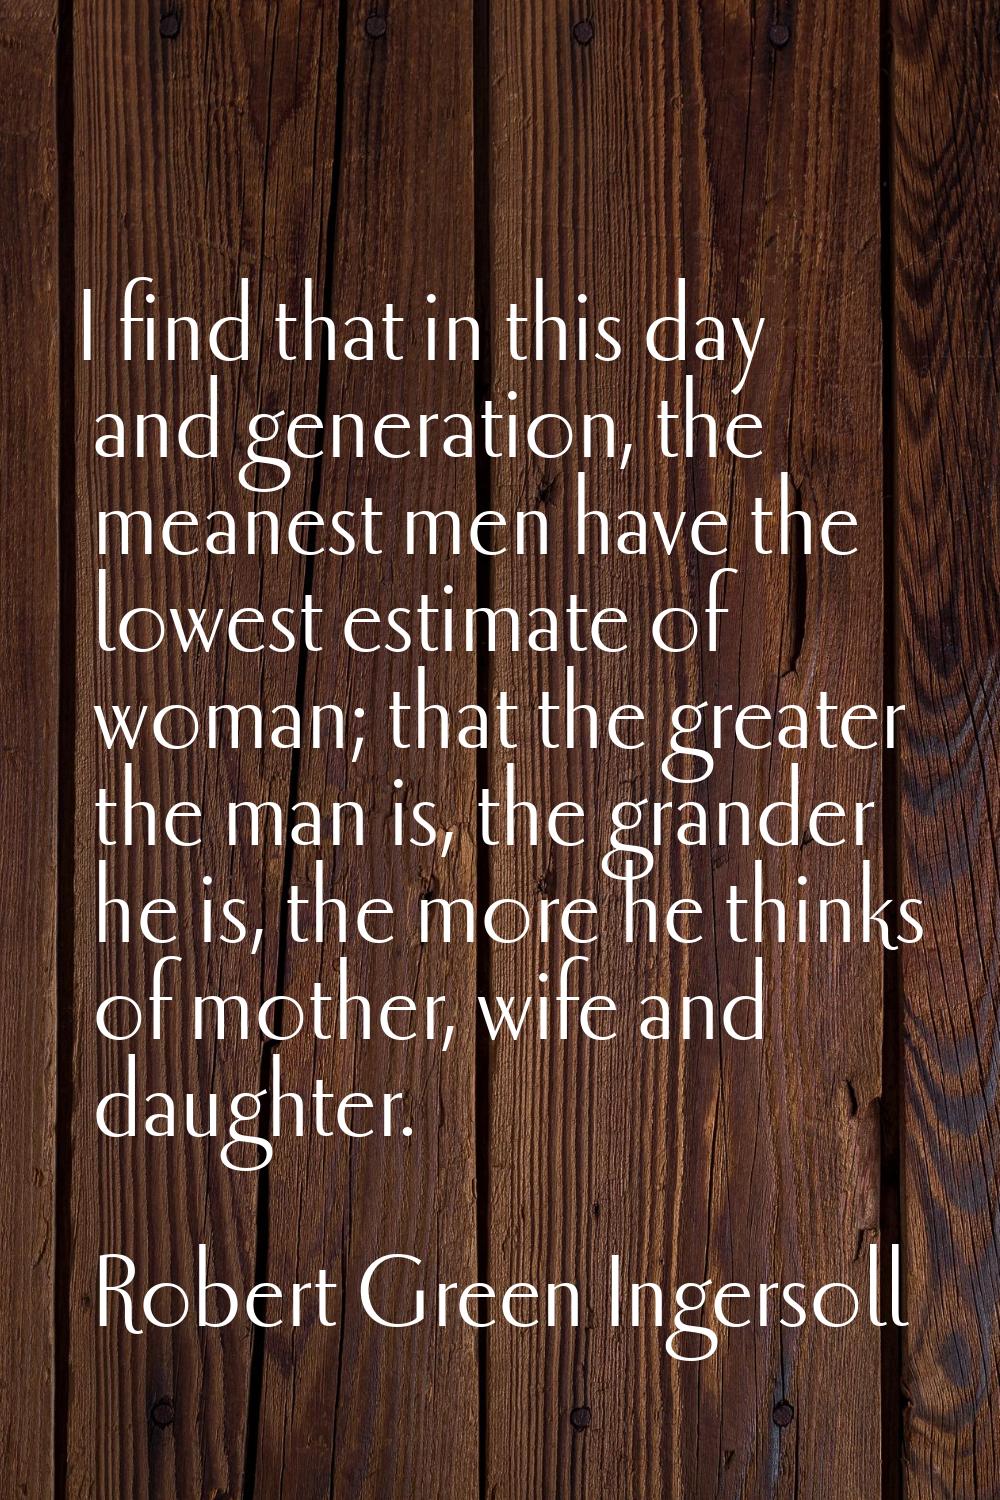 I find that in this day and generation, the meanest men have the lowest estimate of woman; that the